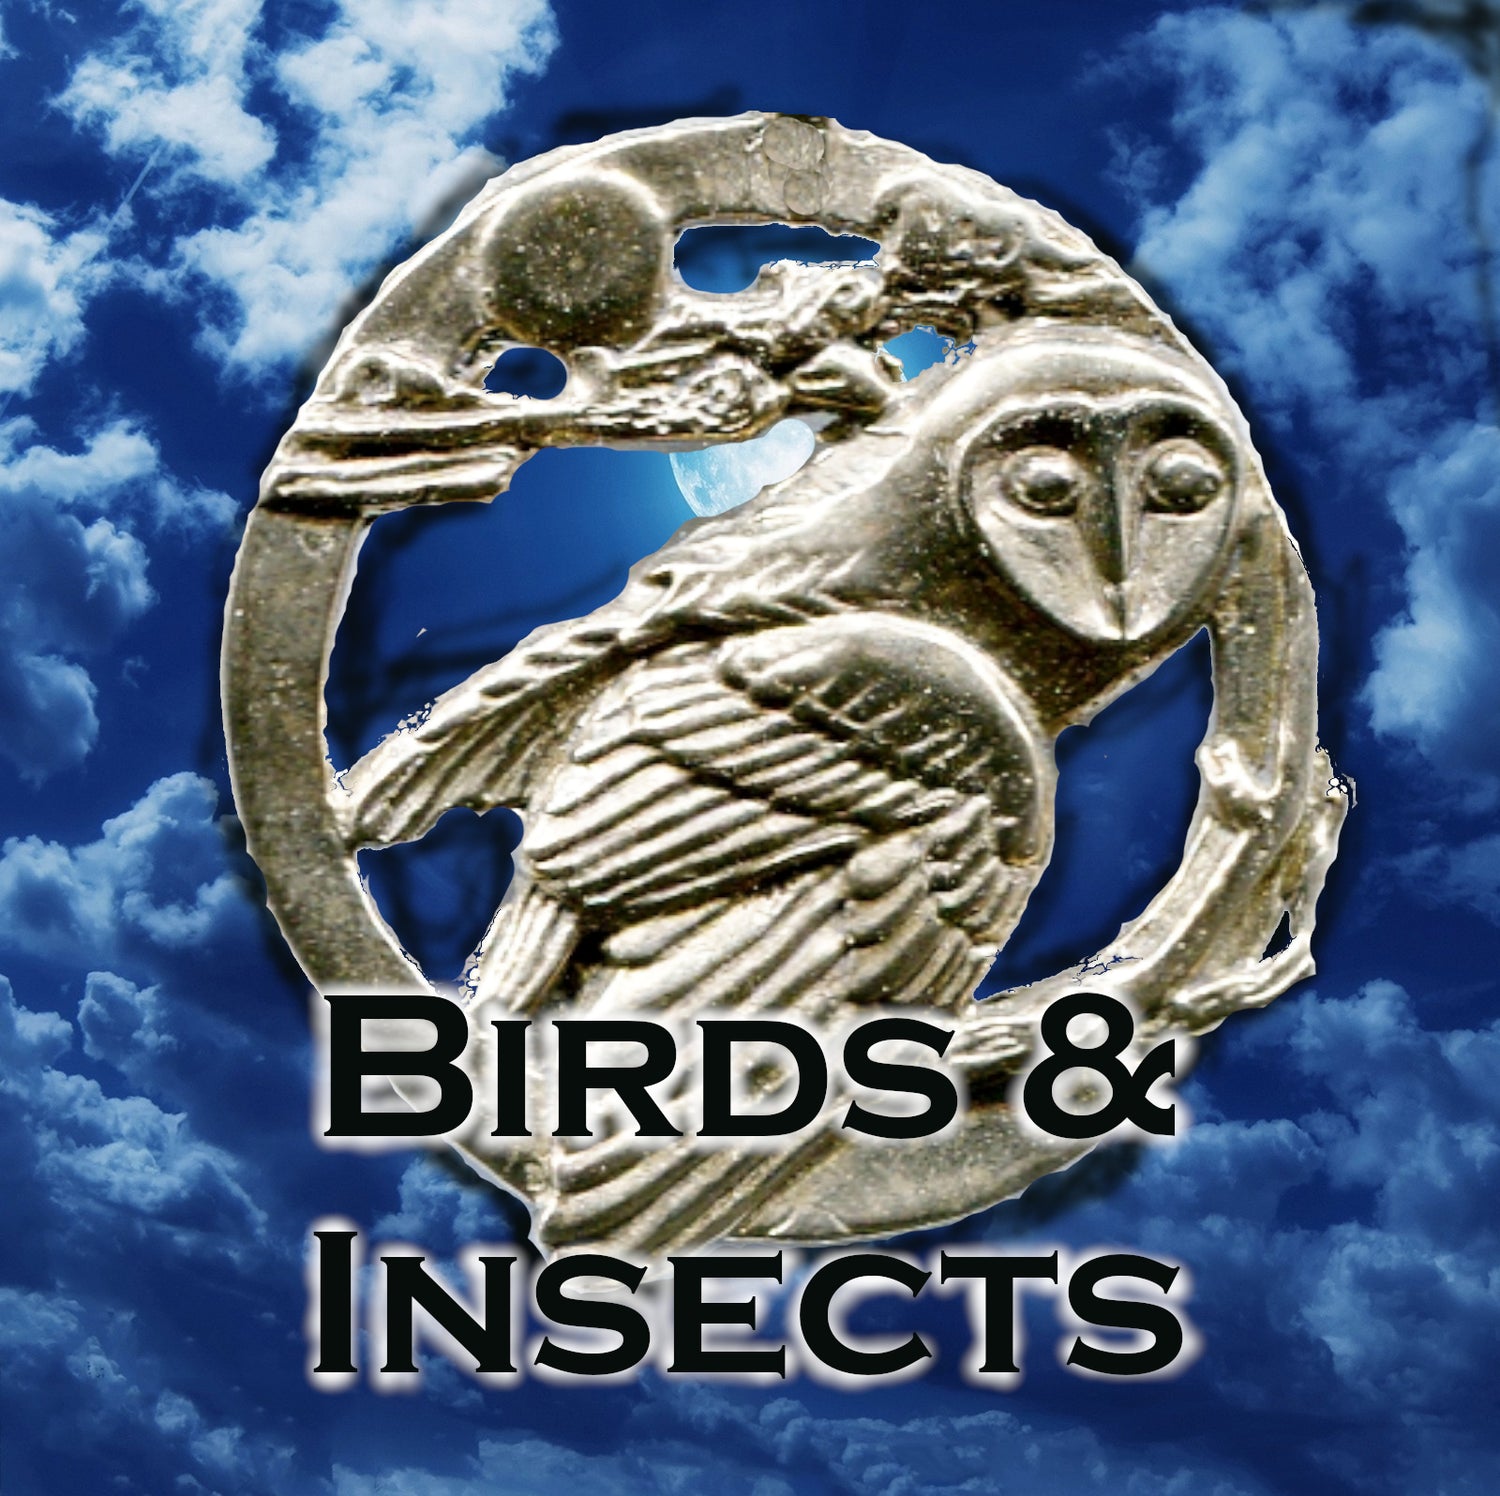 Birds & Insects